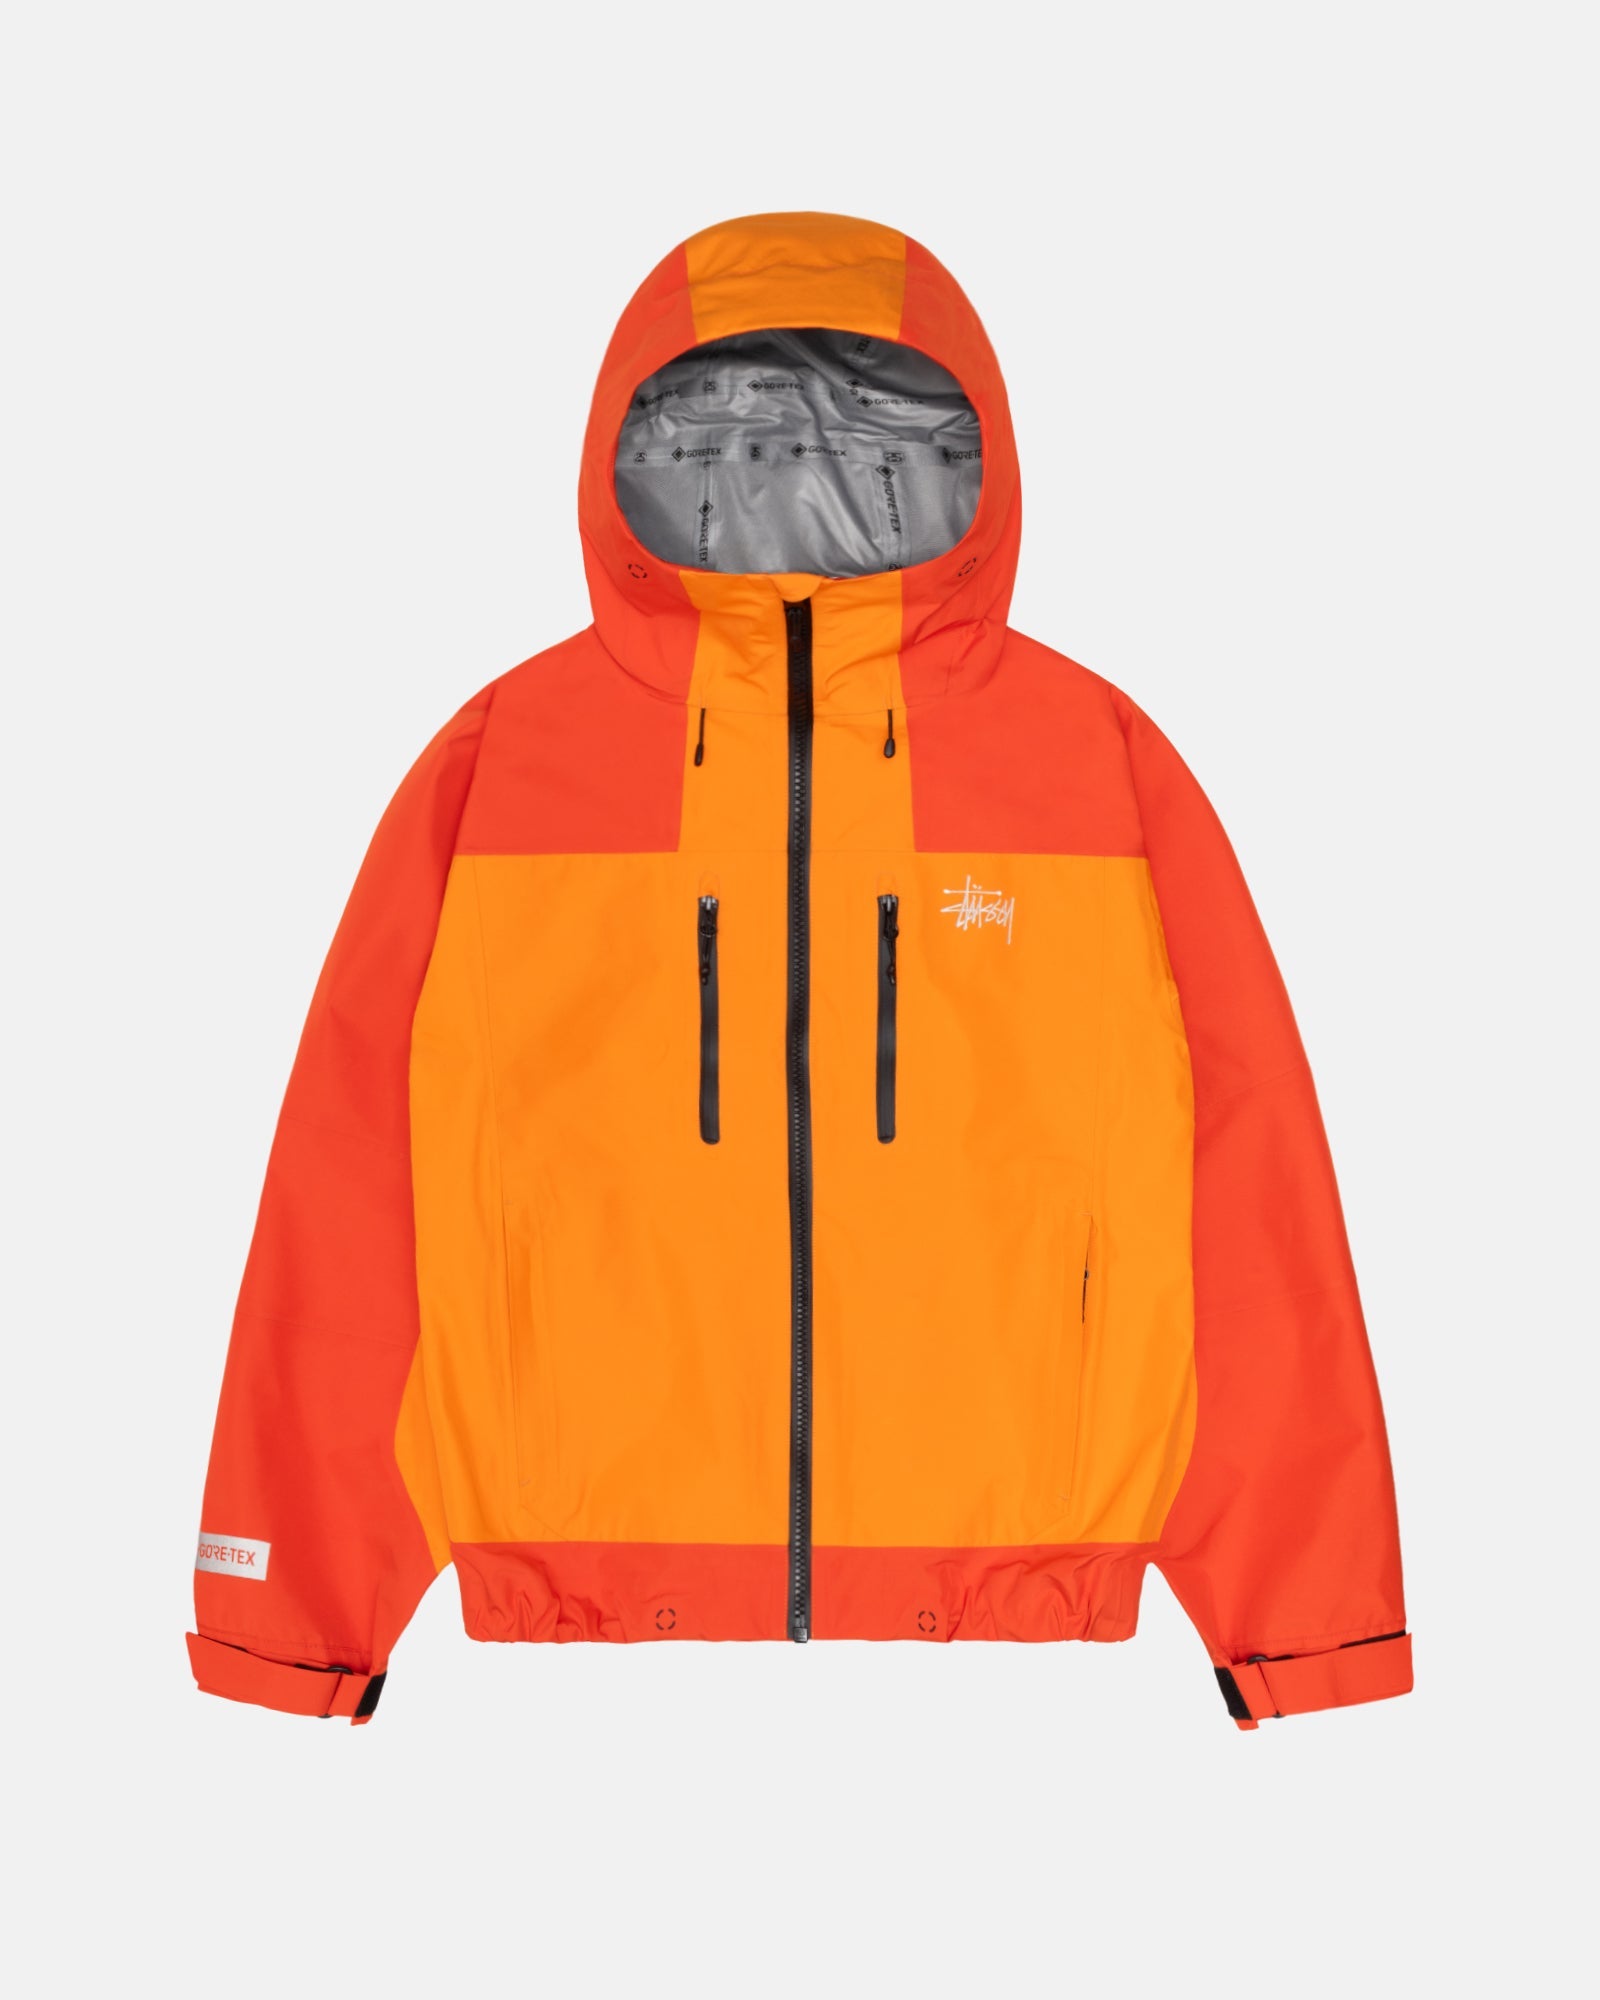 Gore-Tex Recycled Guide Shell - Unisex Jackets & Outerwear